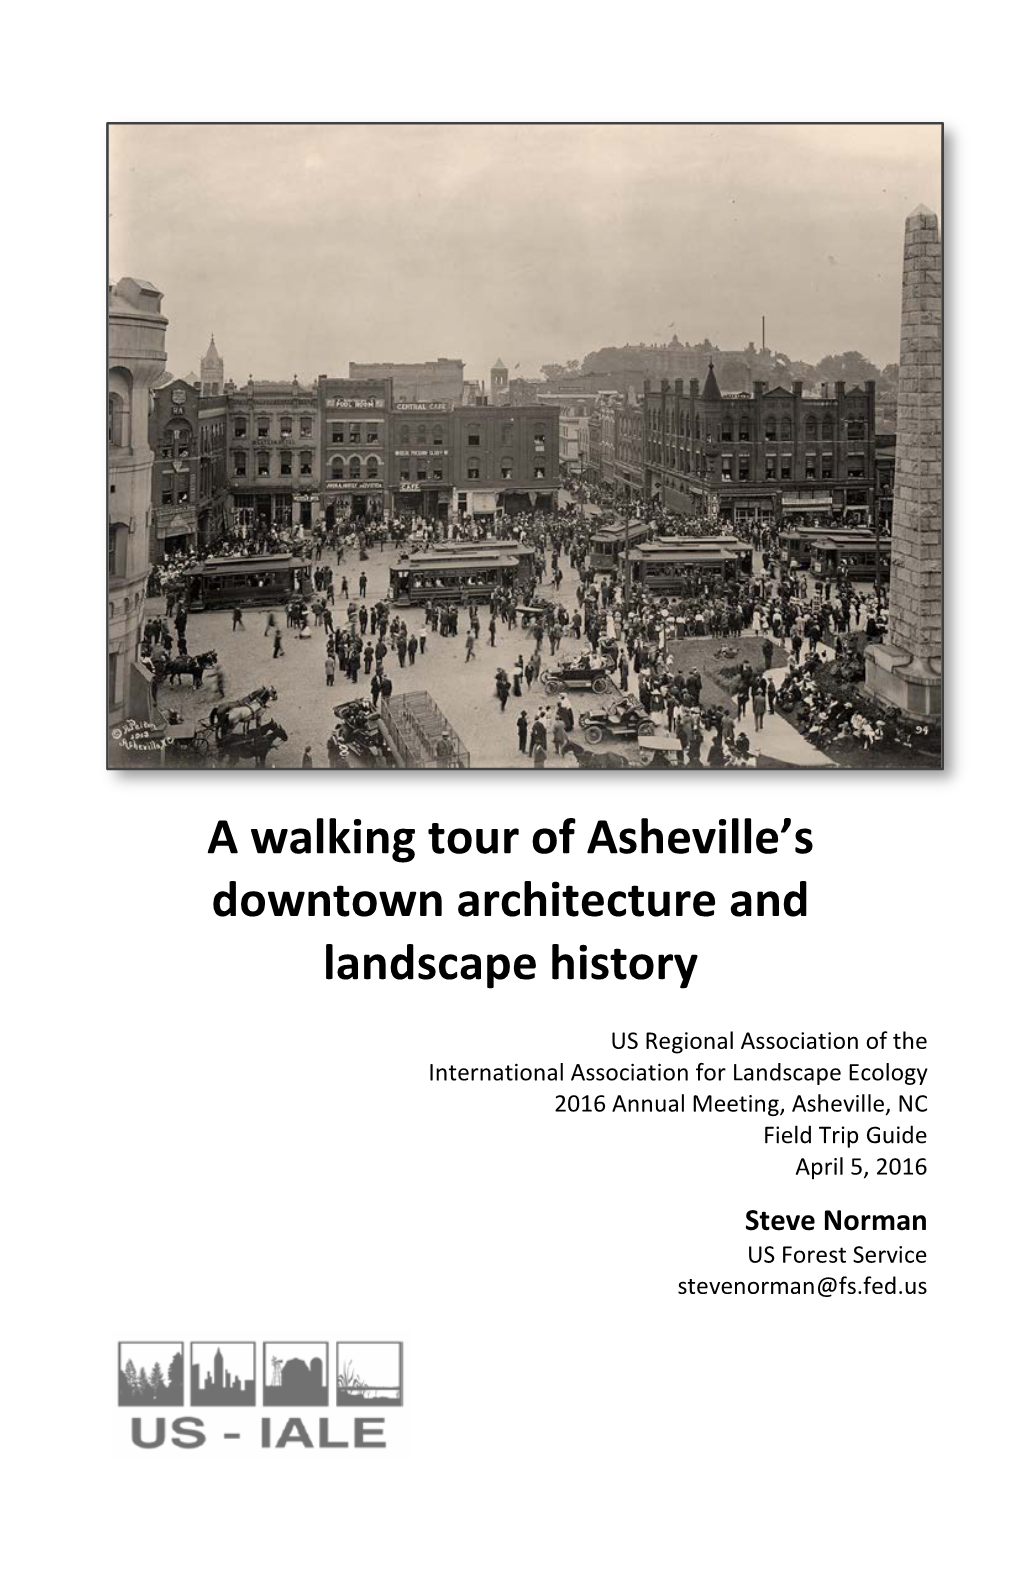 A Walking Tour of Asheville's Downtown Architecture and Landscape History